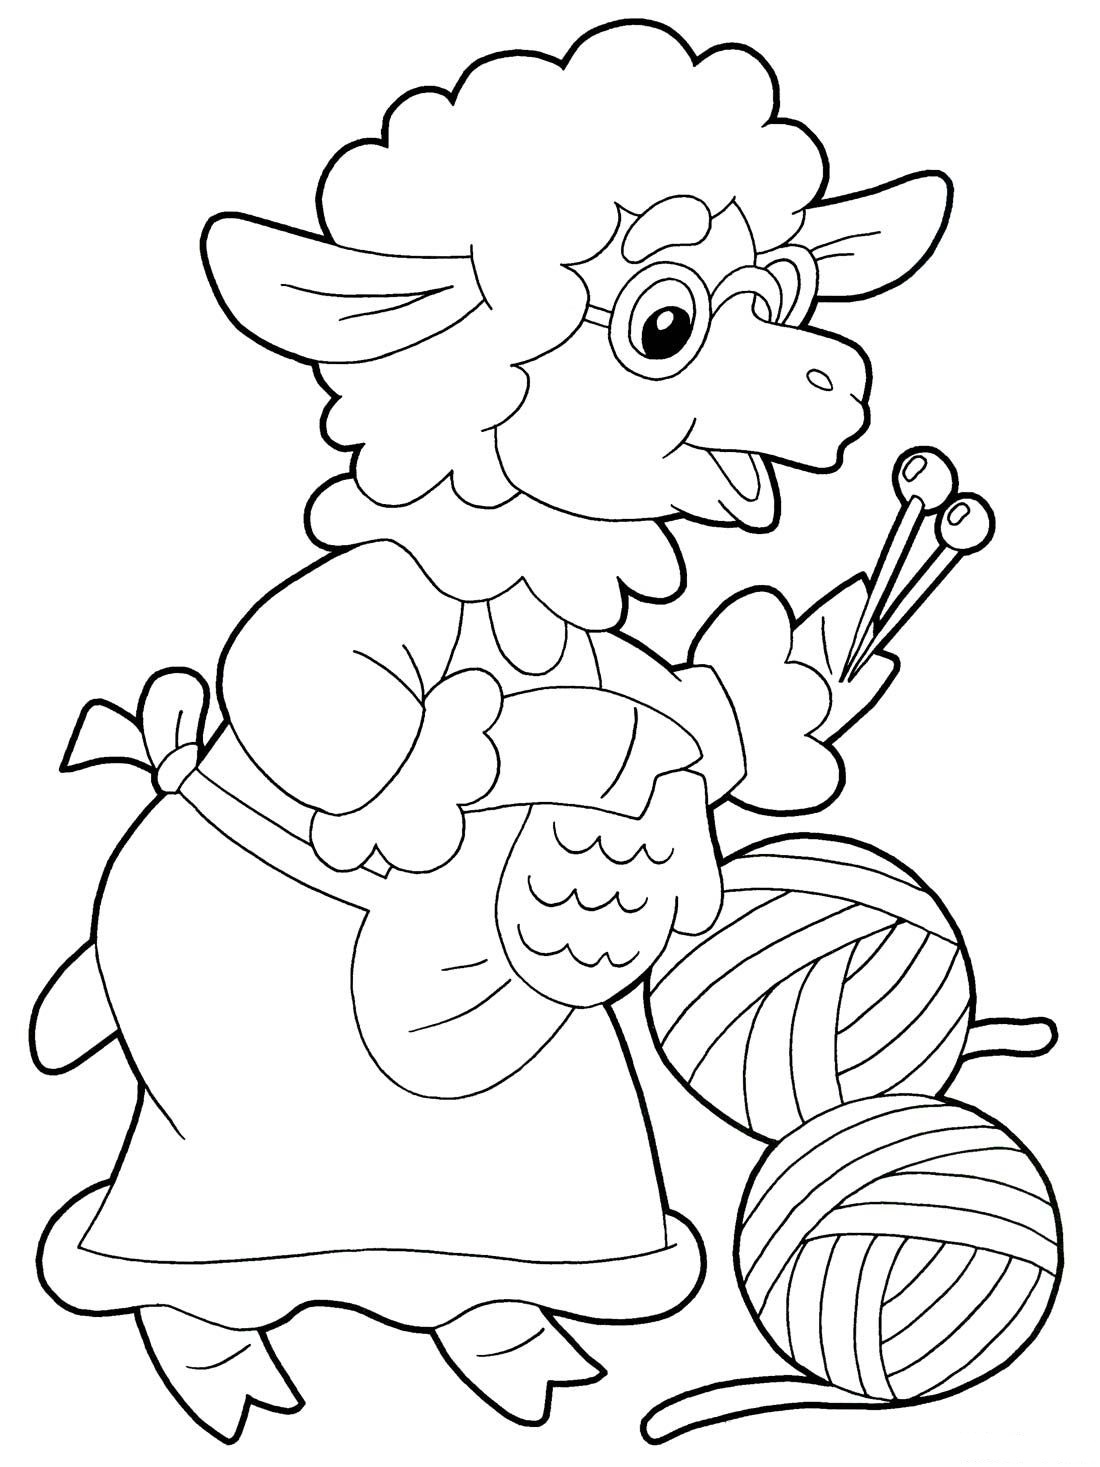 sheep coloring pages to print year of sheep 2015